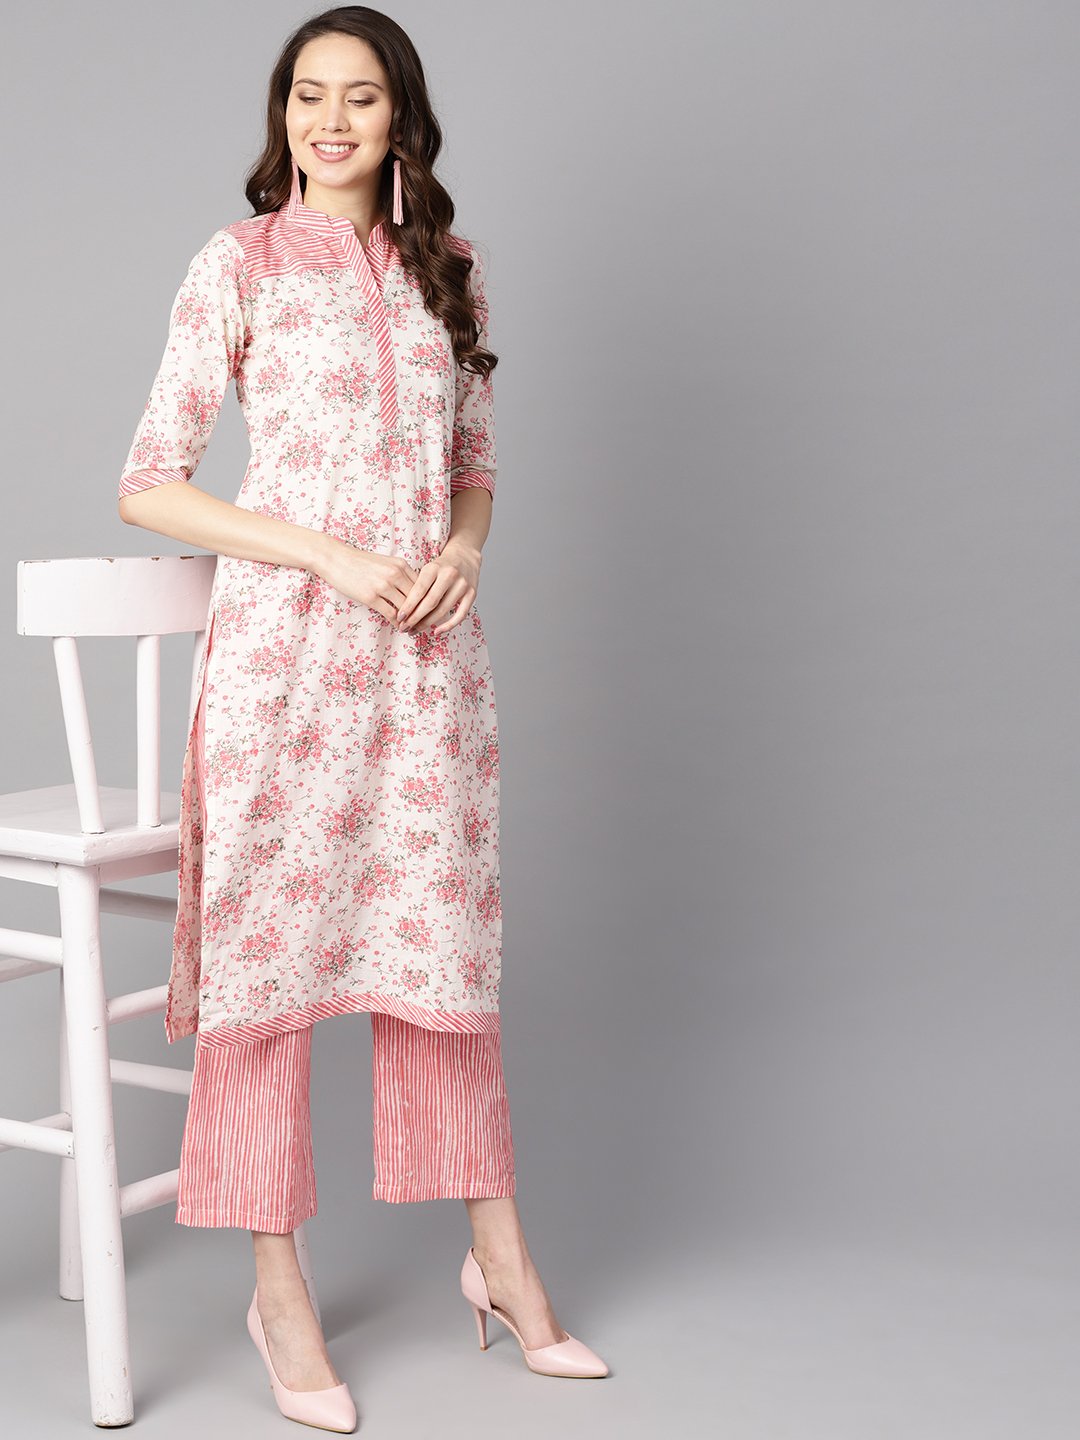 Women's Off-White Floral Printed Straight Kurta With Stripped Yoke And Cigratte Pants. - Nayo Clothing